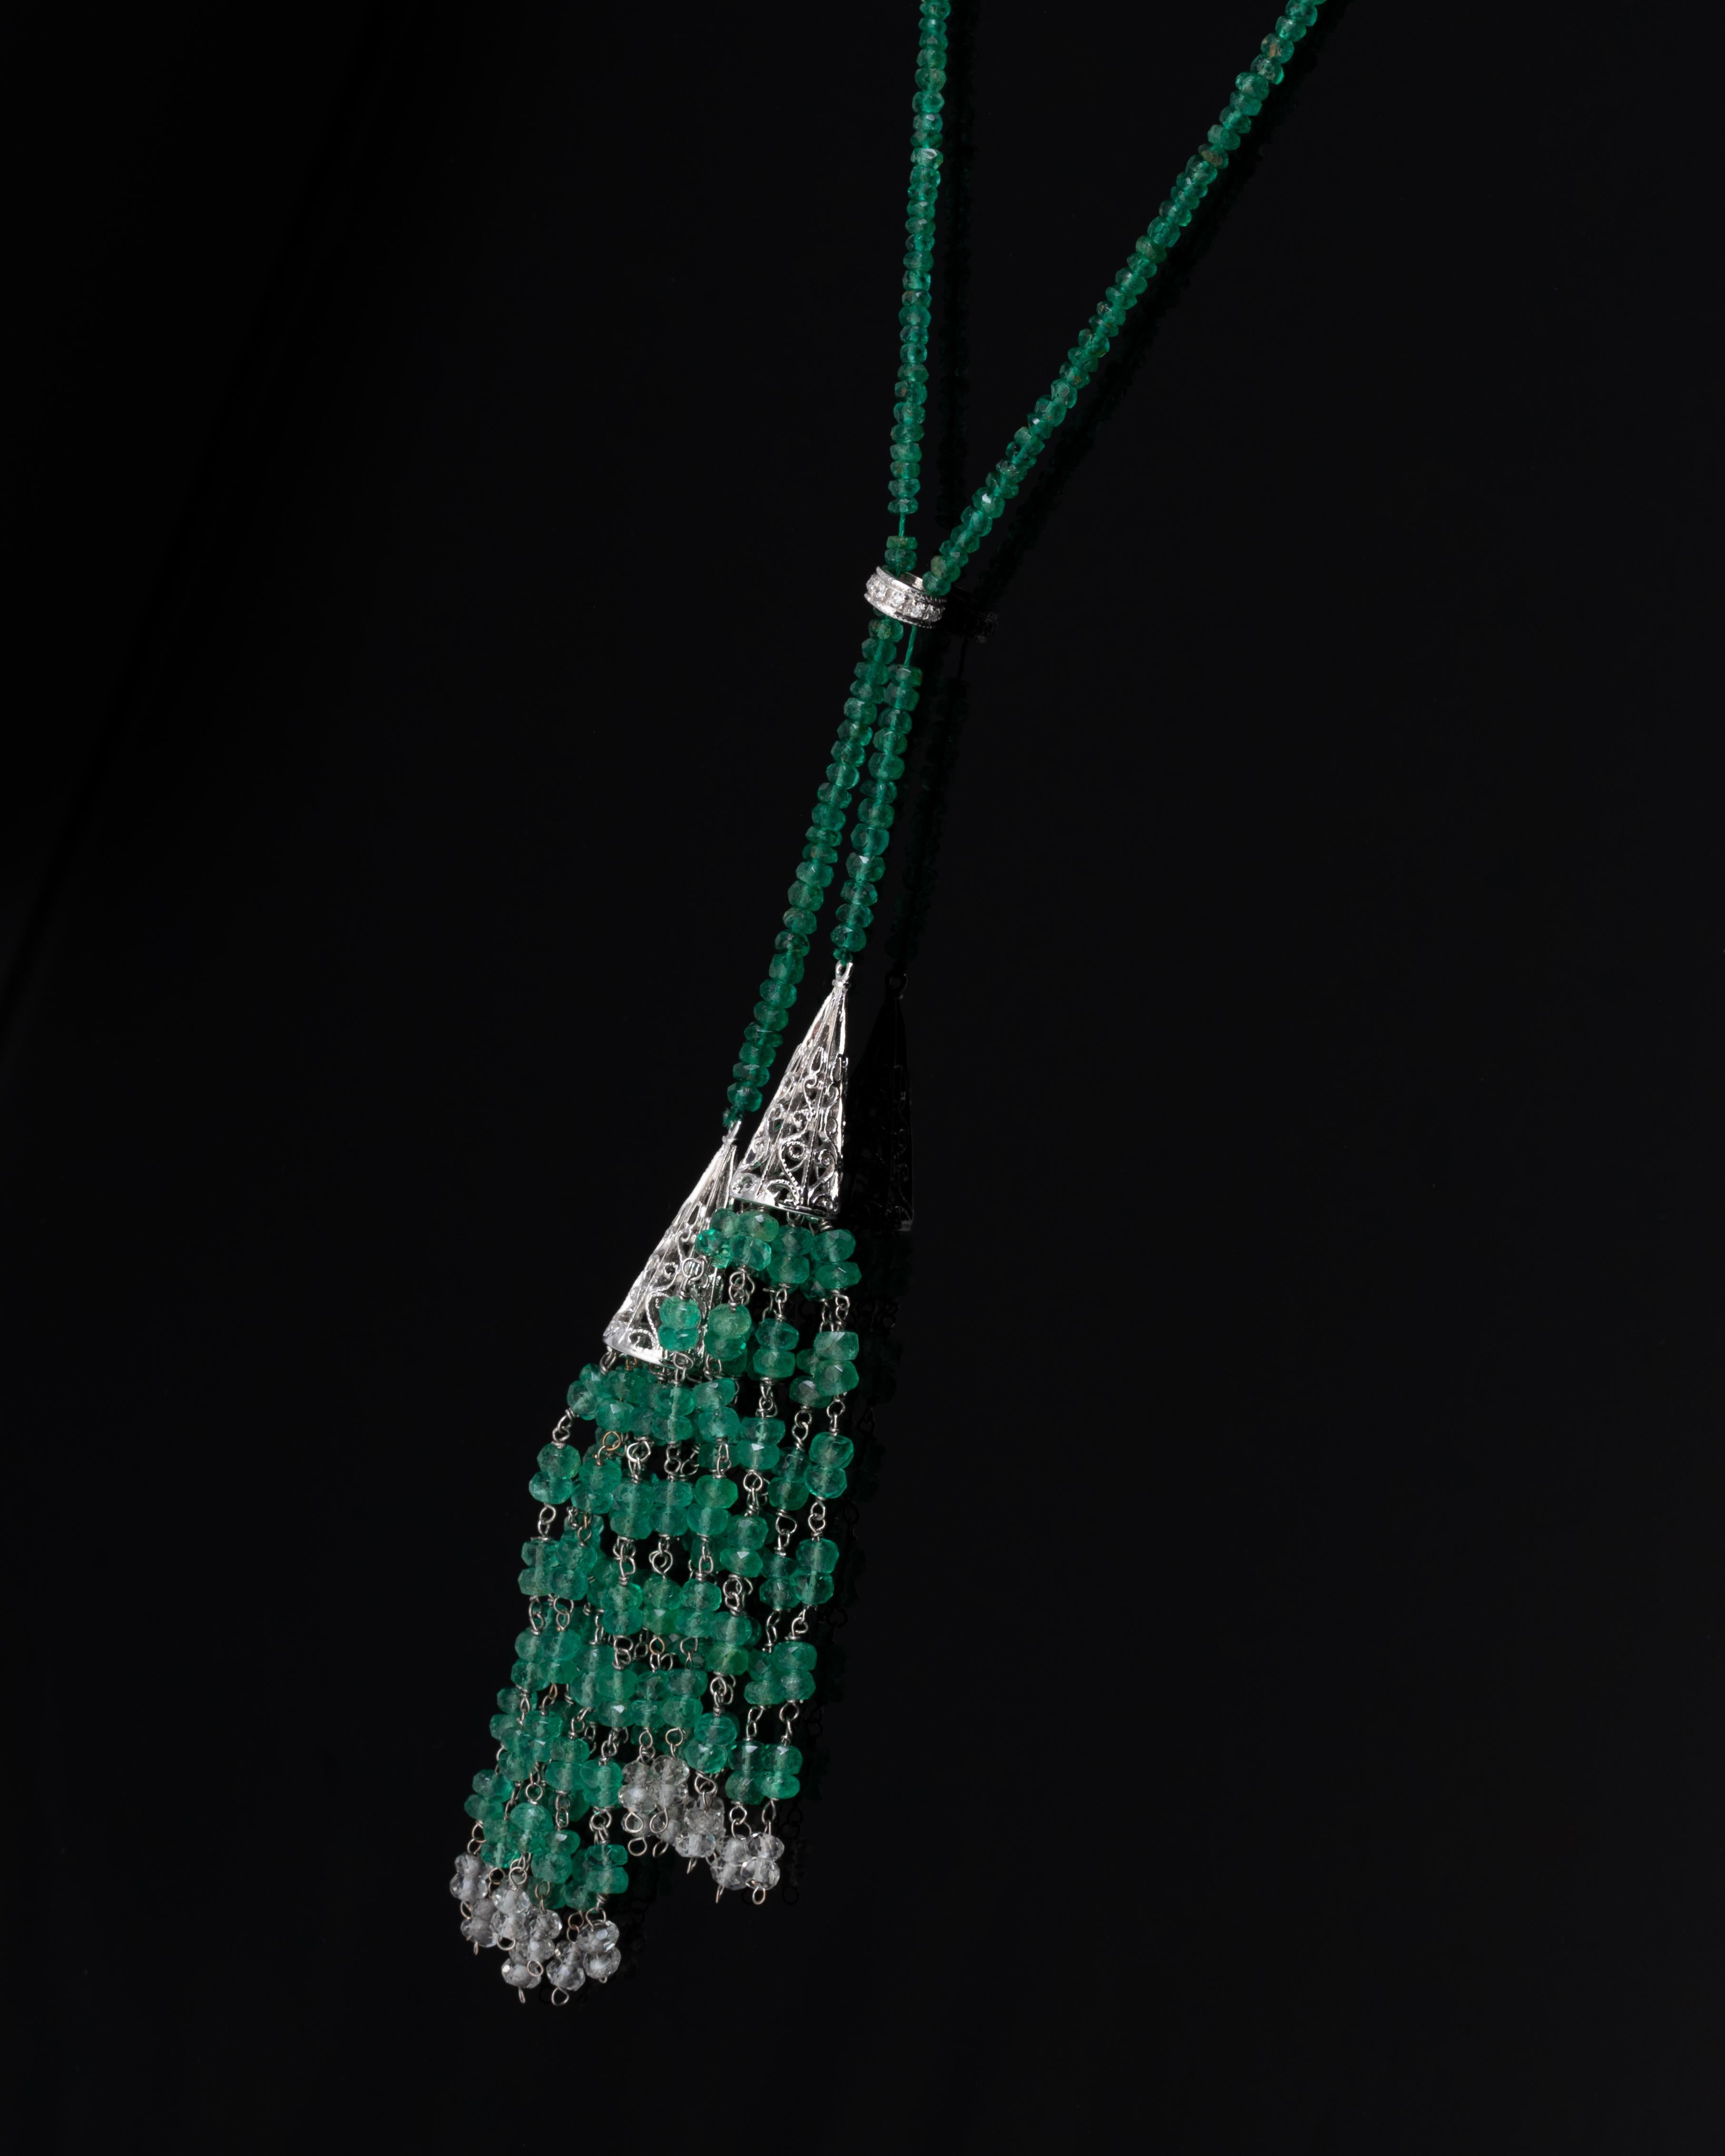 A lovely, art-deco  necklace with 100 carats of high-quality, faceted natural Colombian Emerald beads with Diamonds set in 18K White Gold. The necklace is around 18.5 inches long. 

This necklace is simple, yet it makes a statement! We are open to